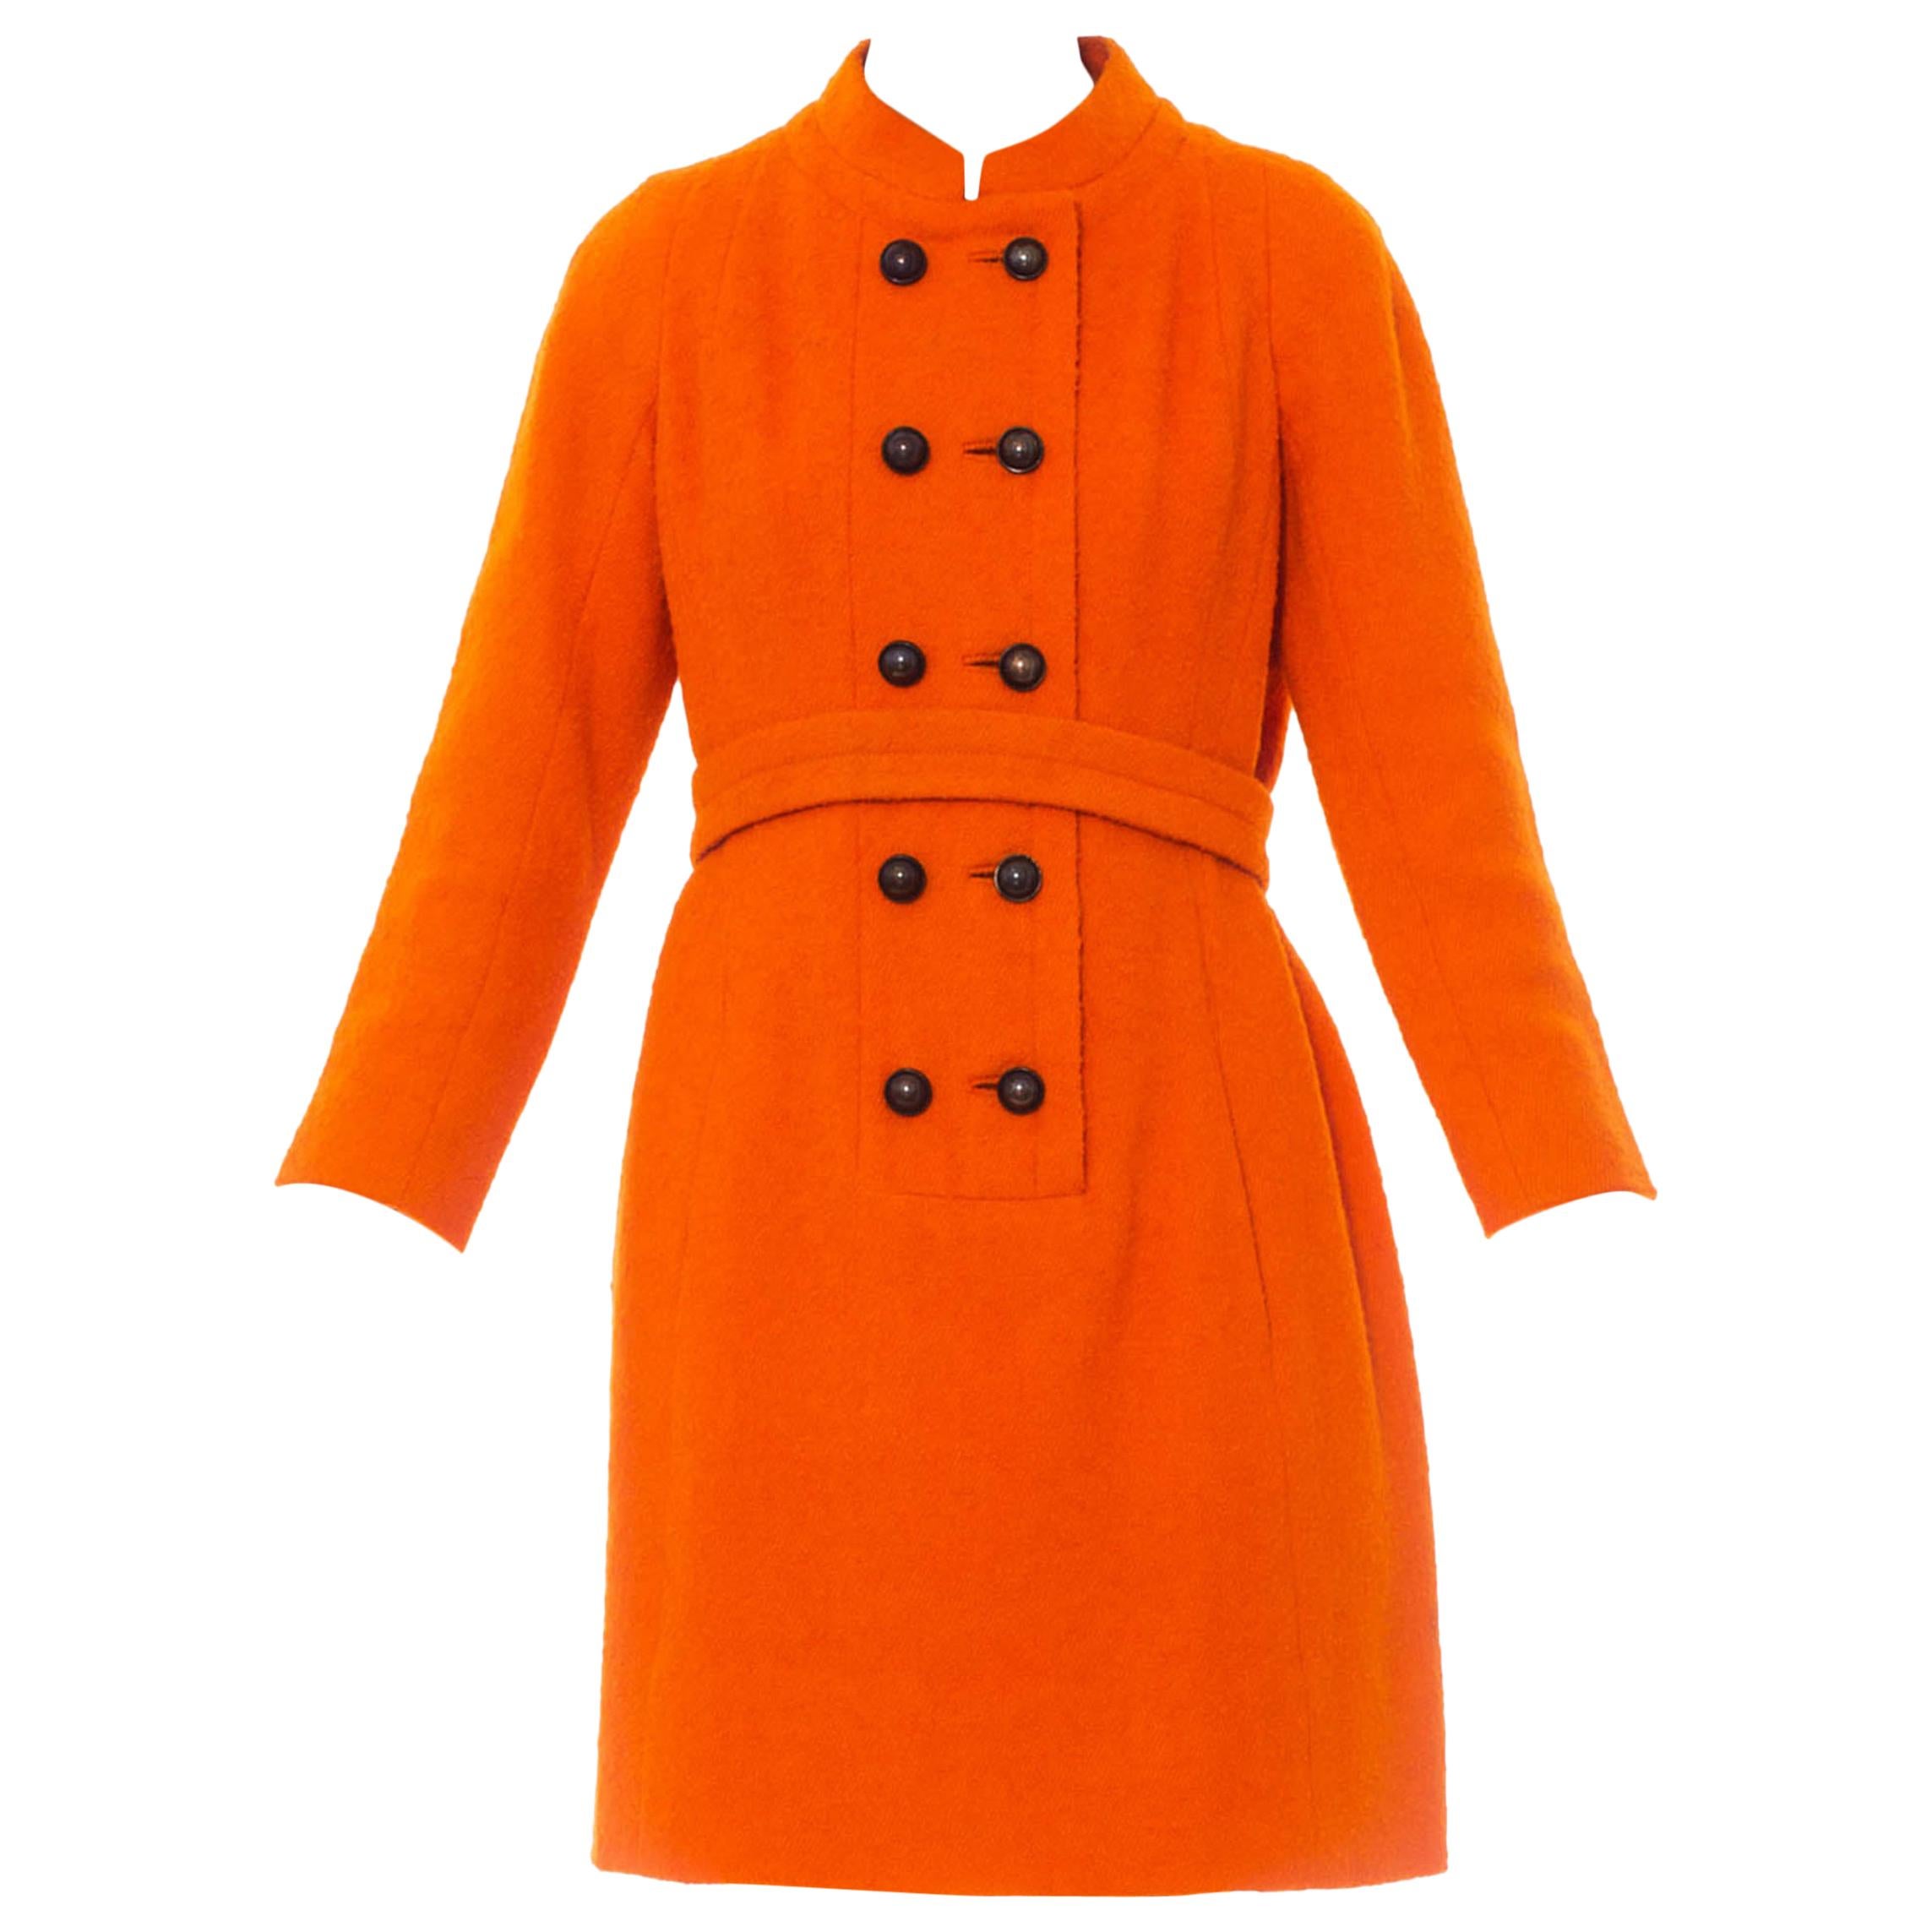 1960S GALANOS Orange Wool Boucle Mod Shift Dress Fully Lined In Silk With Pocke